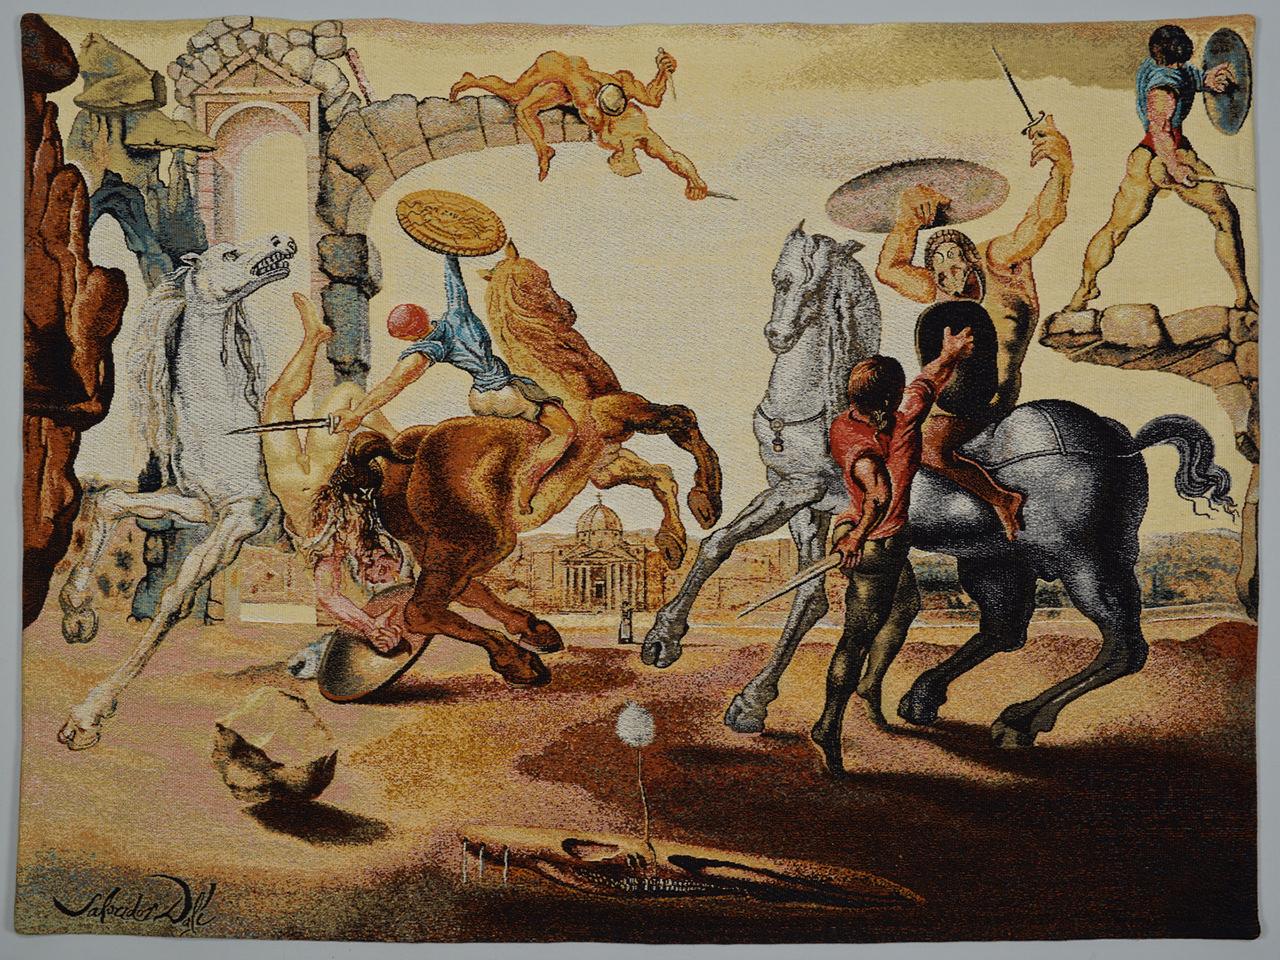 Salvador Dali, 1904-1989 tapestry “Battle Around A Dandelion”. Published in France by DEMART PRO ARTE 1988. #247 of 600. It is already framed and matted to 66 x 54 inches. A “Certificate of Authenticity” will accompany this work.

The intricately